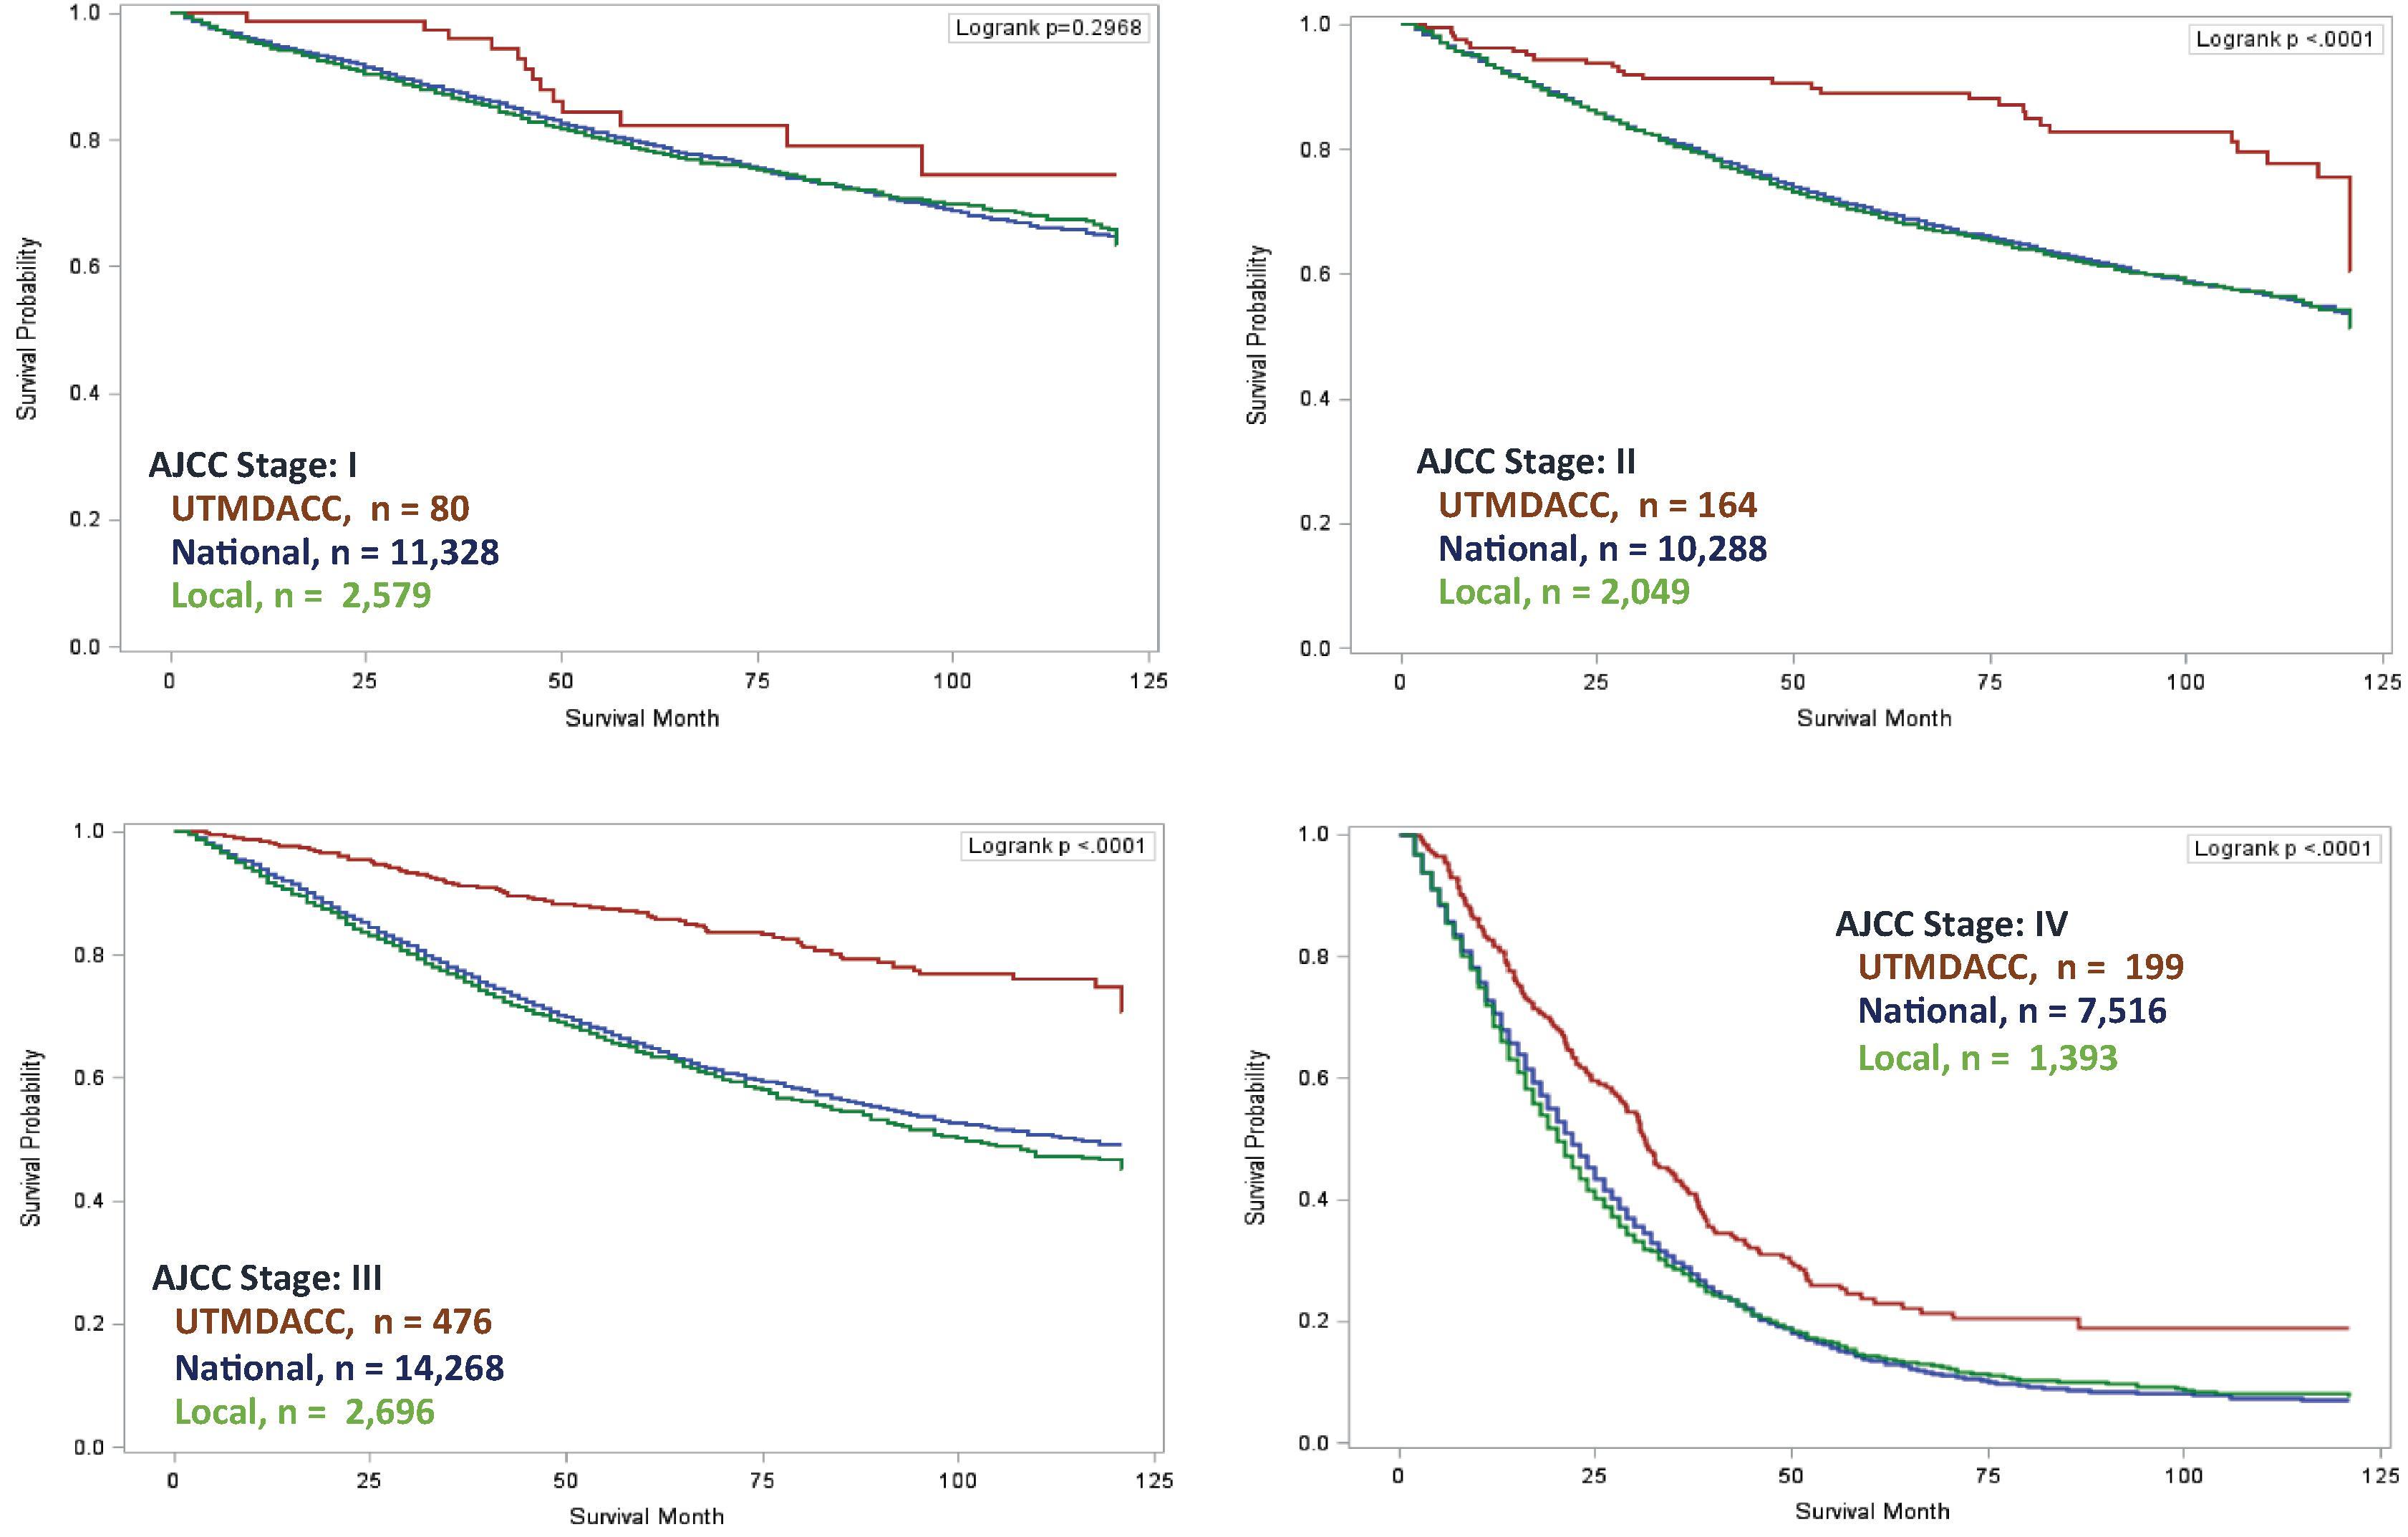 Fig. 53.3, Kaplan-Meier survival comparison for colorectal cancer by American Joint Commitee on Cancer ( AJCC ) Stage: 2005–2014 Subsite: Rectum, Rectosigmoid.